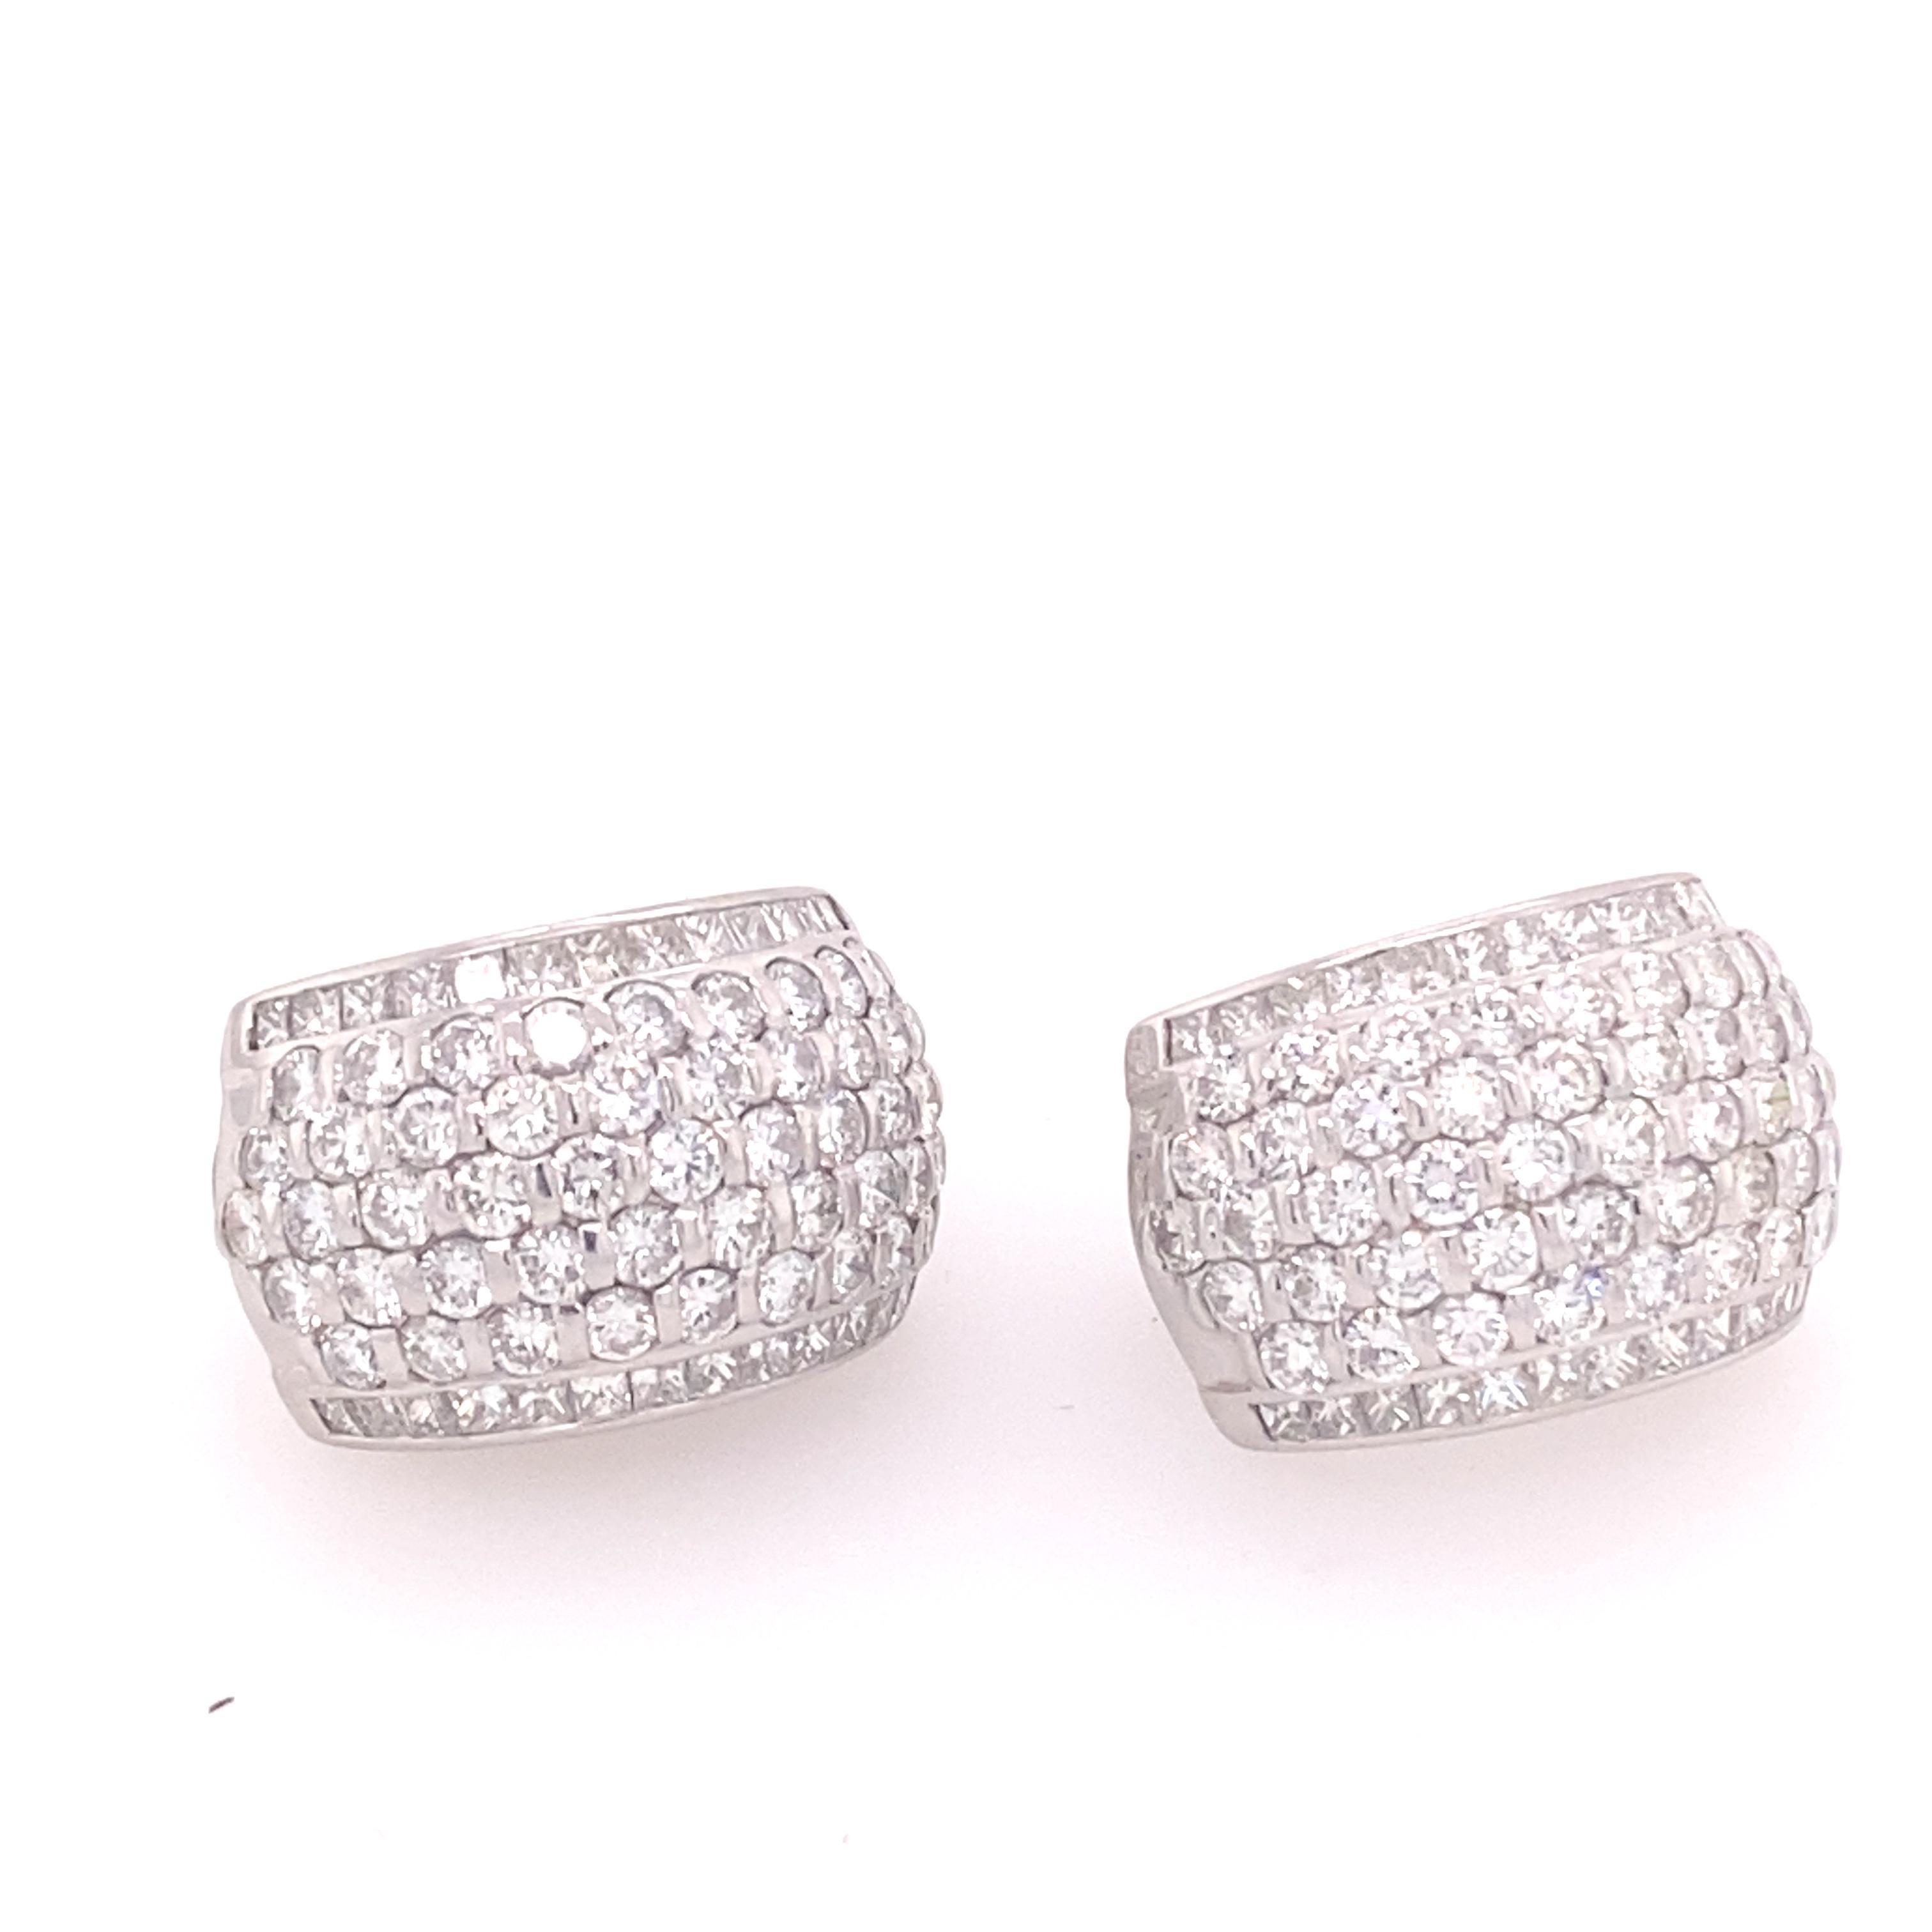 3.50 Carat Total Weight of Fine Round Diamonds in Platinum Earrings 1